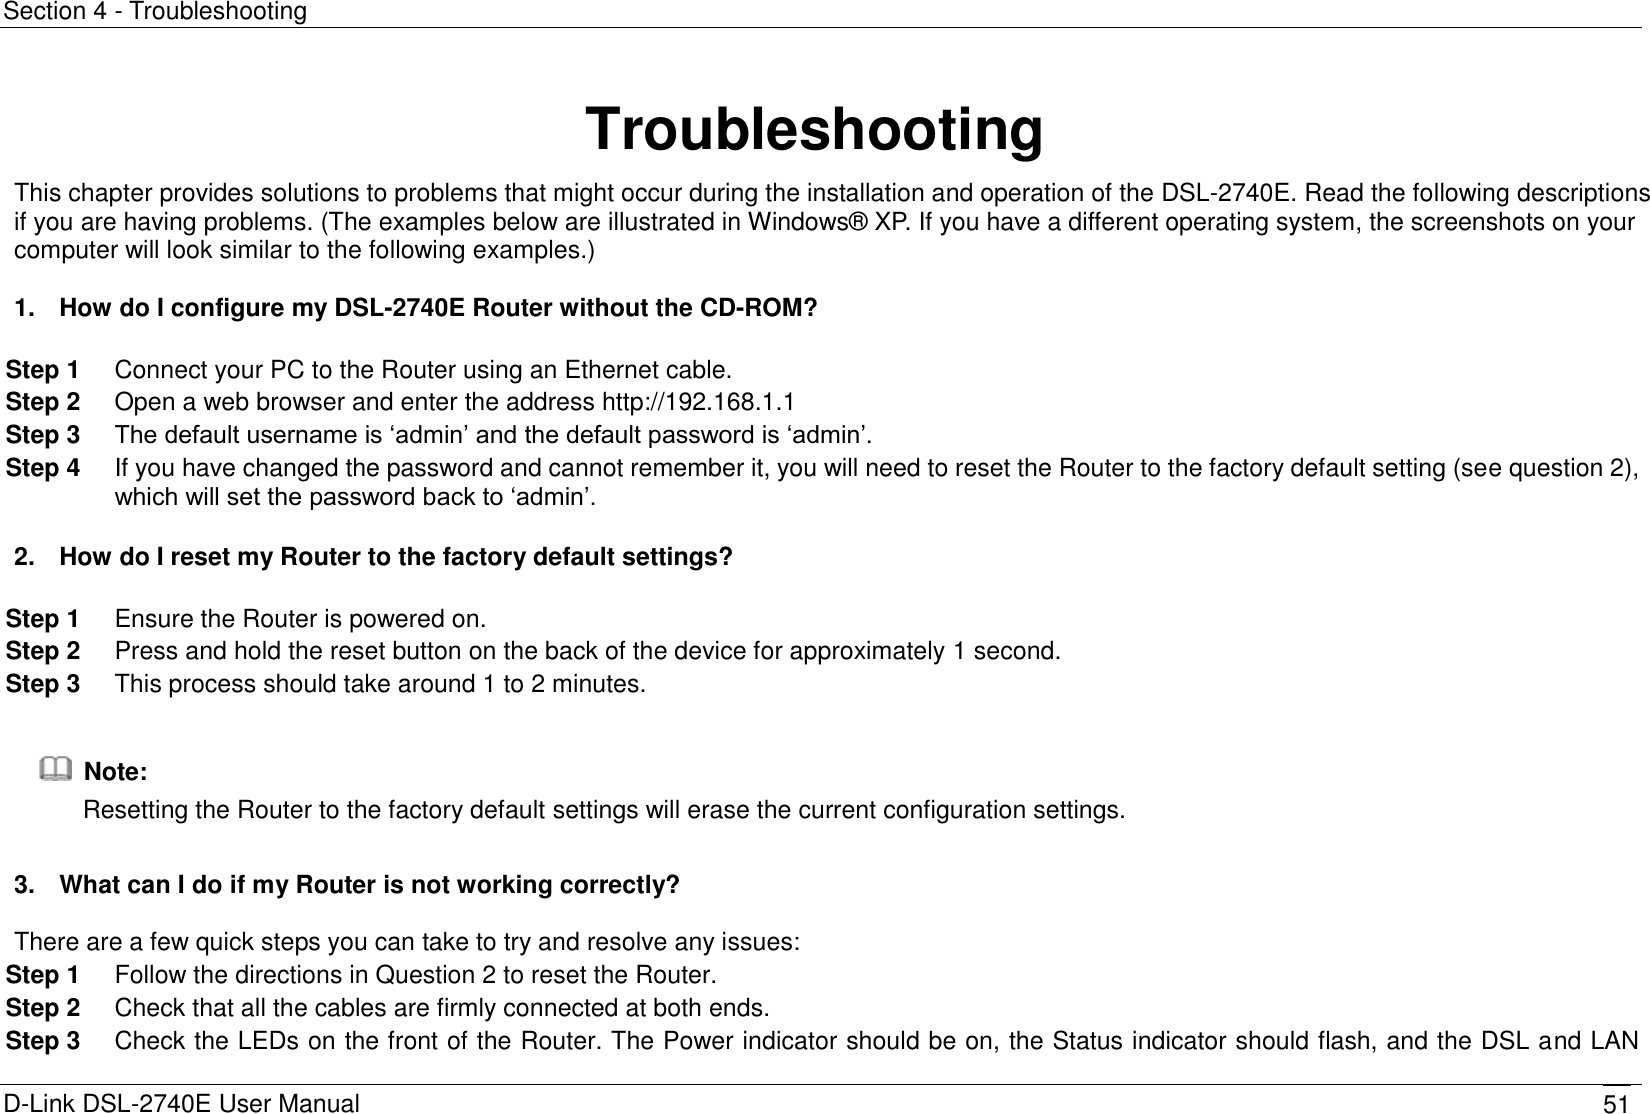 Section 4 - Troubleshooting D-Link DSL-2740E User Manual 51 Troubleshooting This chapter provides solutions to problems that might occur during the installation and operation of the DSL-2740E. Read the following descriptions if you are having problems. (The examples below are illustrated in Windows®  XP. If you have a different operating system, the screenshots on your computer will look similar to the following examples.)  1.  How do I configure my DSL-2740E Router without the CD-ROM?  Step 1  Connect your PC to the Router using an Ethernet cable. Step 2  Open a web browser and enter the address http://192.168.1.1 Step 3  The default username is ‘admin’ and the default password is ‘admin’. Step 4  If you have changed the password and cannot remember it, you will need to reset the Router to the factory default setting (see question 2), which will set the password back to ‘admin’.  2.  How do I reset my Router to the factory default settings?  Step 1  Ensure the Router is powered on. Step 2  Press and hold the reset button on the back of the device for approximately 1 second. Step 3  This process should take around 1 to 2 minutes.    Note: Resetting the Router to the factory default settings will erase the current configuration settings.  3.  What can I do if my Router is not working correctly?  There are a few quick steps you can take to try and resolve any issues: Step 1  Follow the directions in Question 2 to reset the Router. Step 2  Check that all the cables are firmly connected at both ends. Step 3  Check the LEDs on the front of the Router. The Power indicator should be on, the Status indicator should flash, and the DSL and LAN 